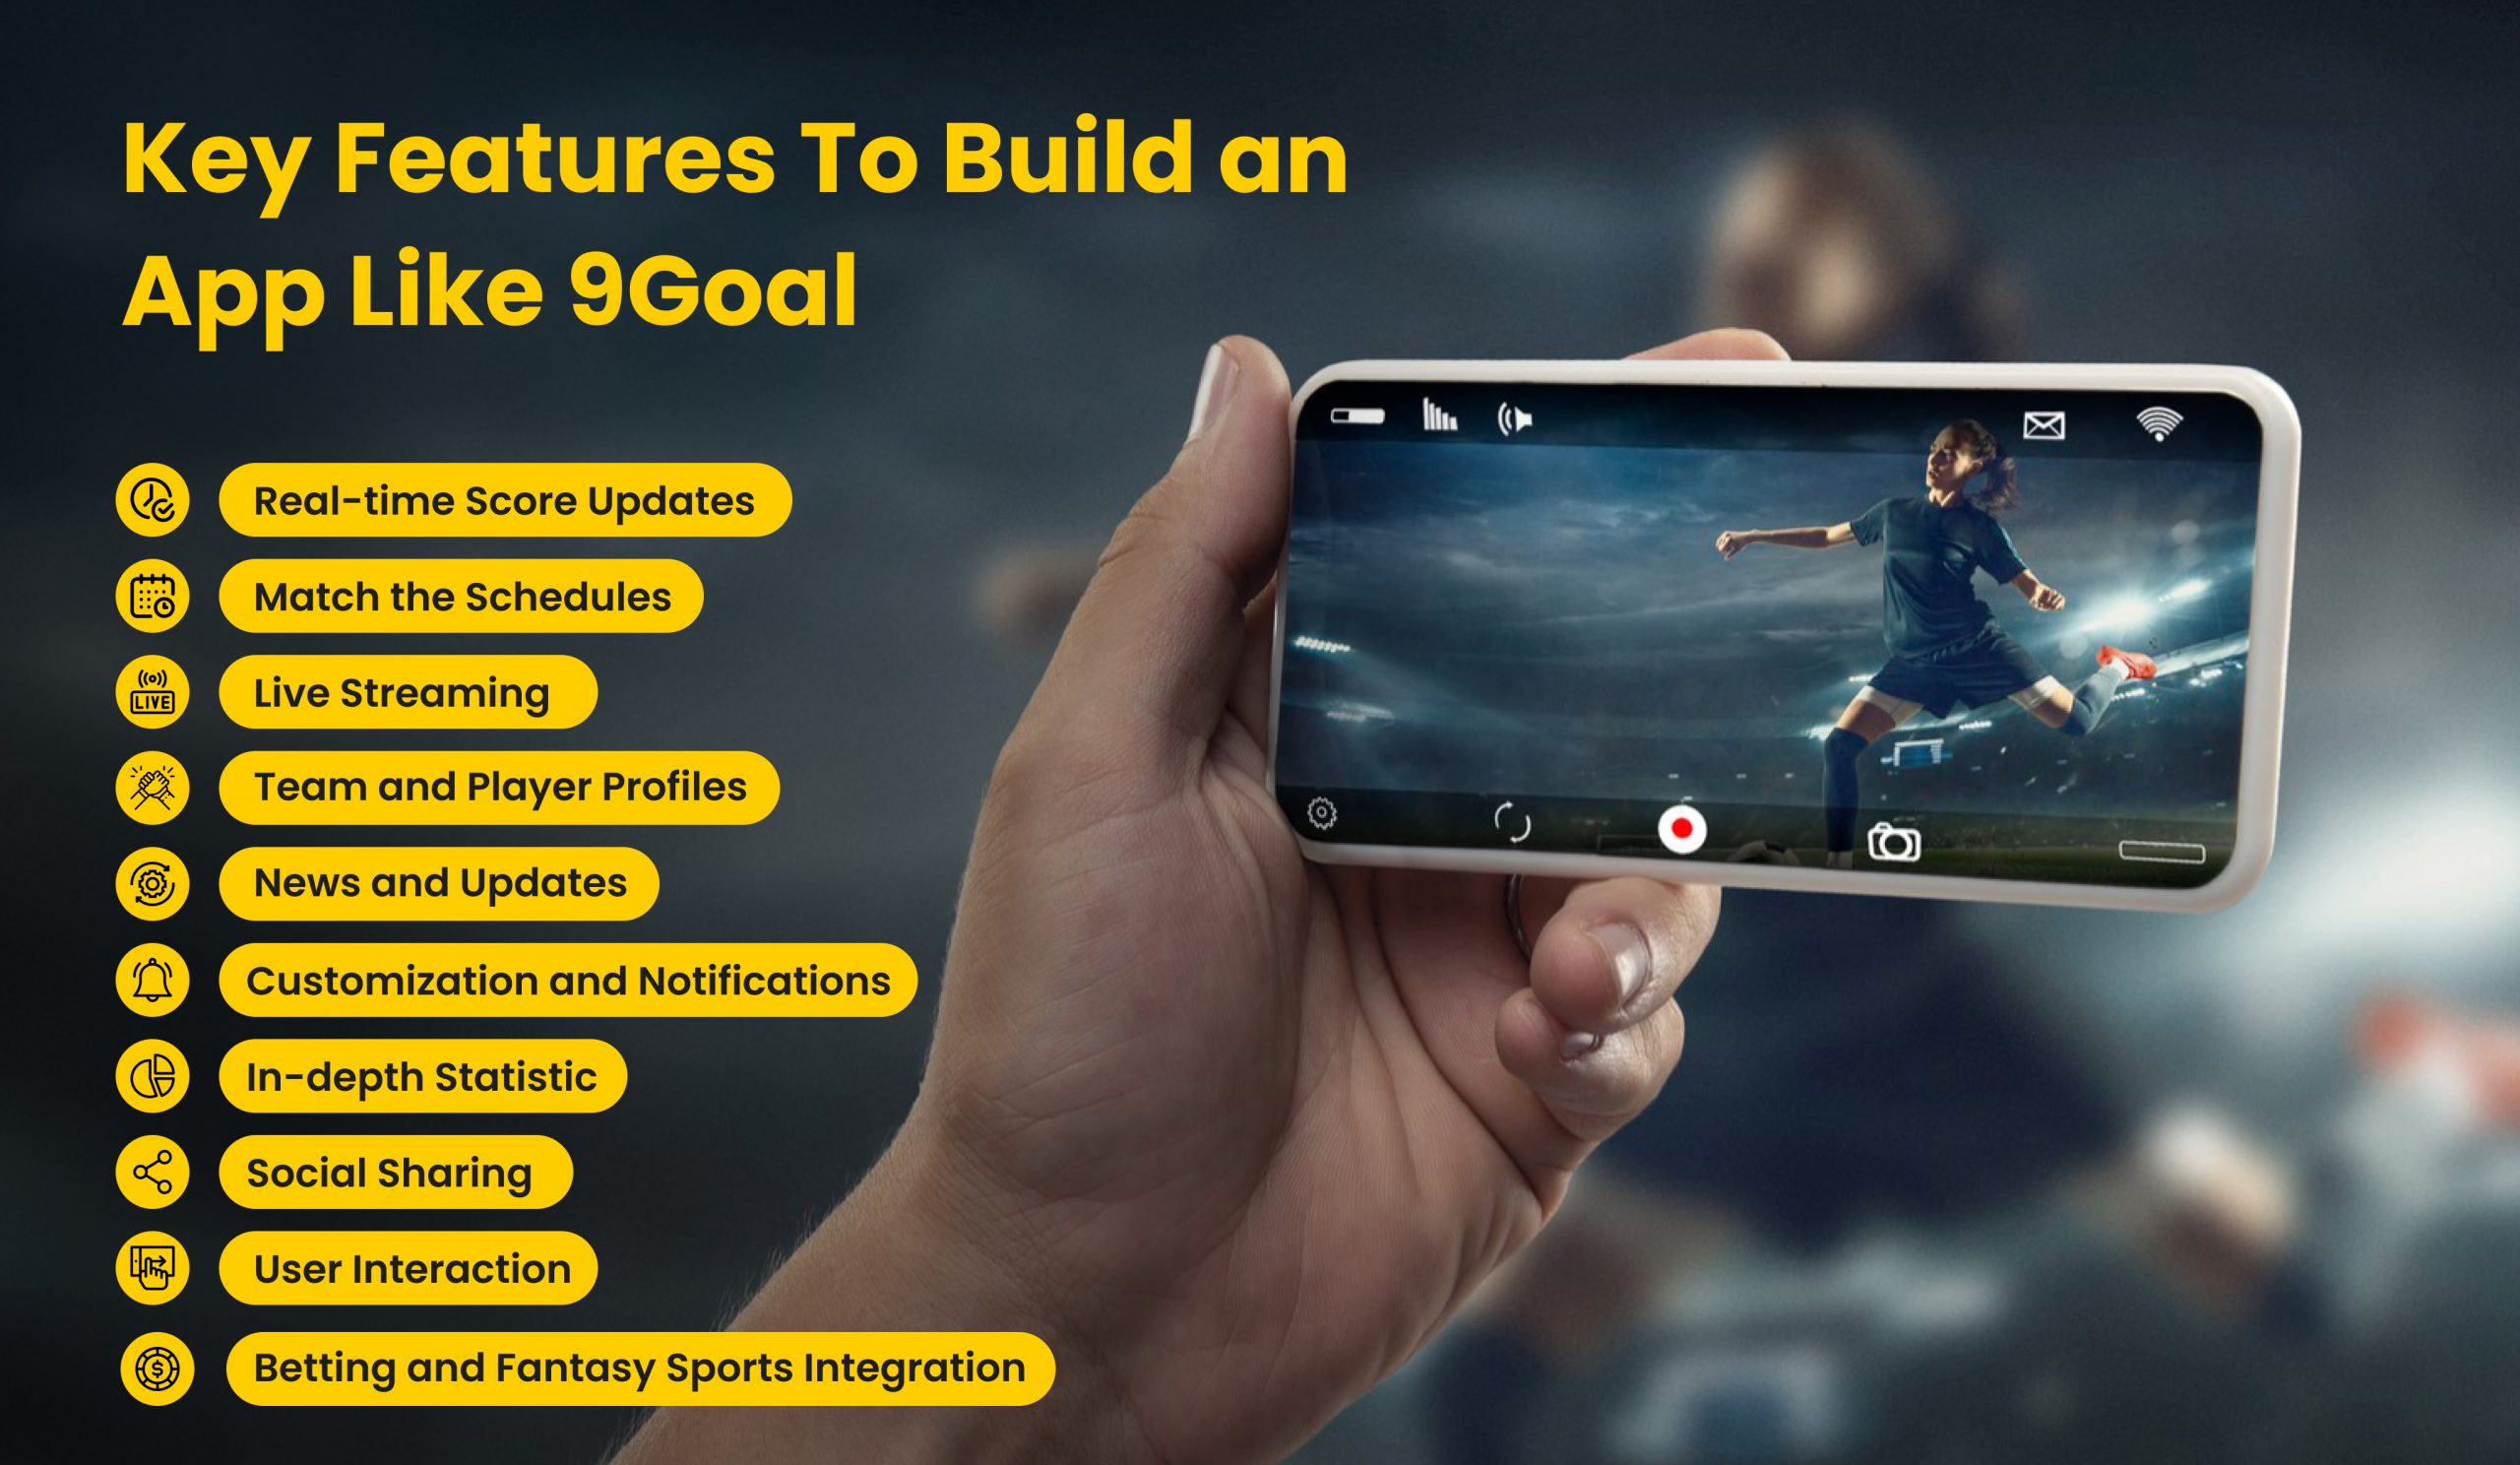 iTechnolabs-key features to build an app like 9goal